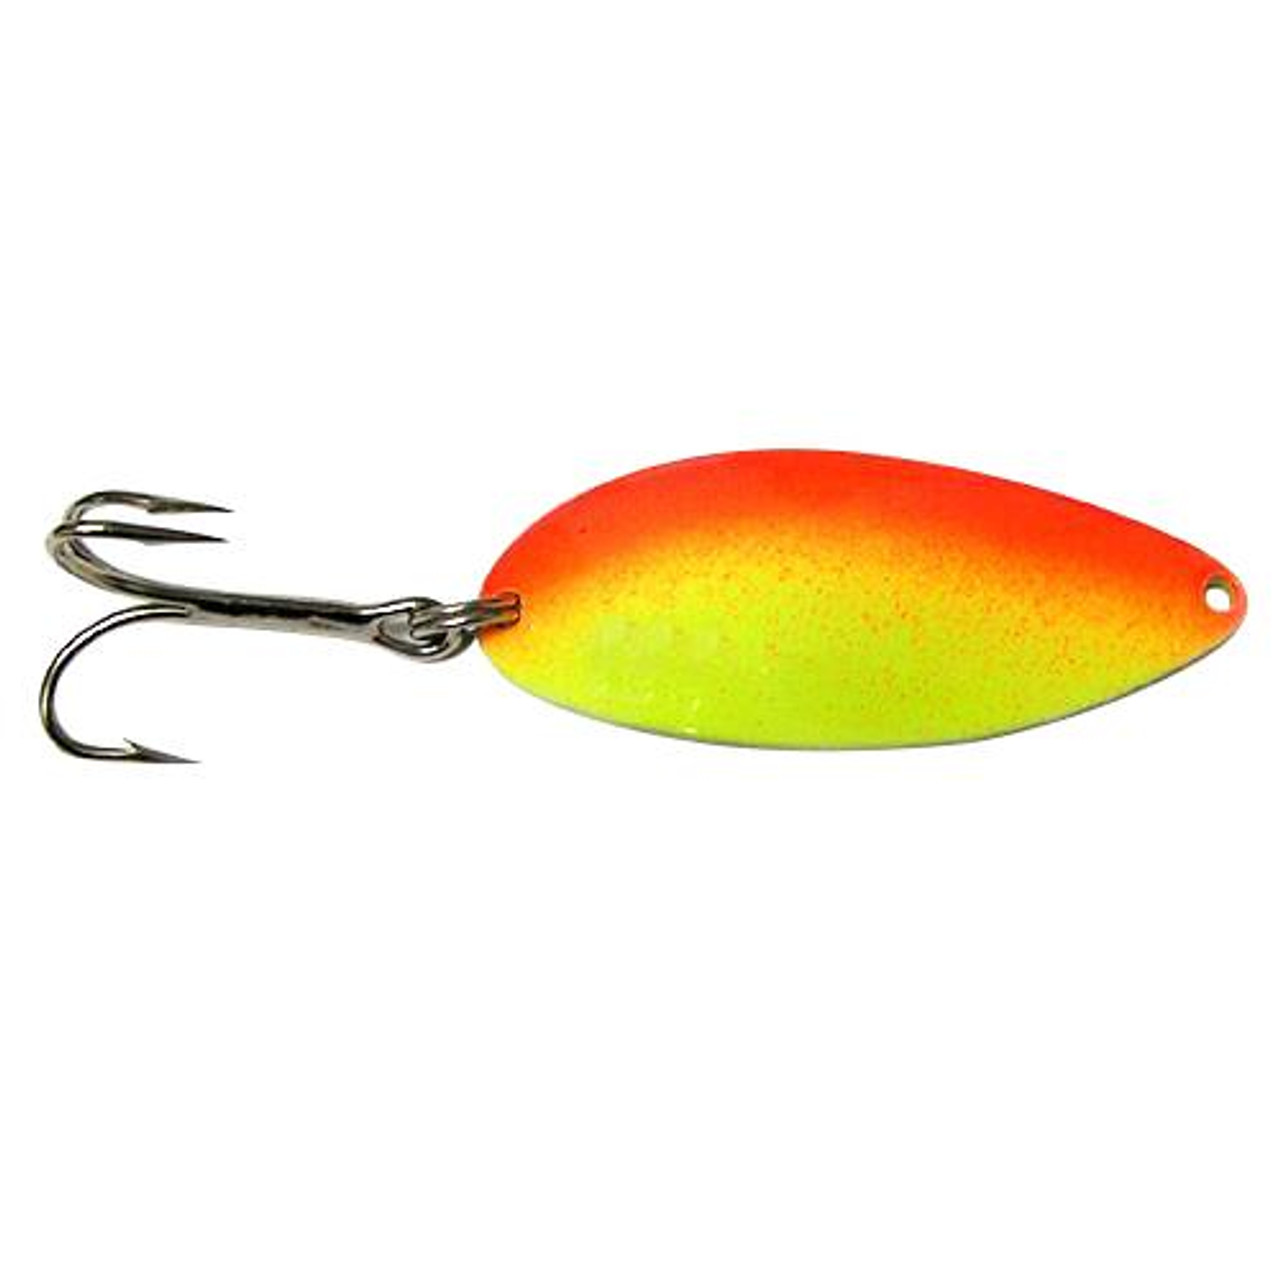 Little Cleo Spoon - Nickel/Chartreuse Stripe by Acme Tackle